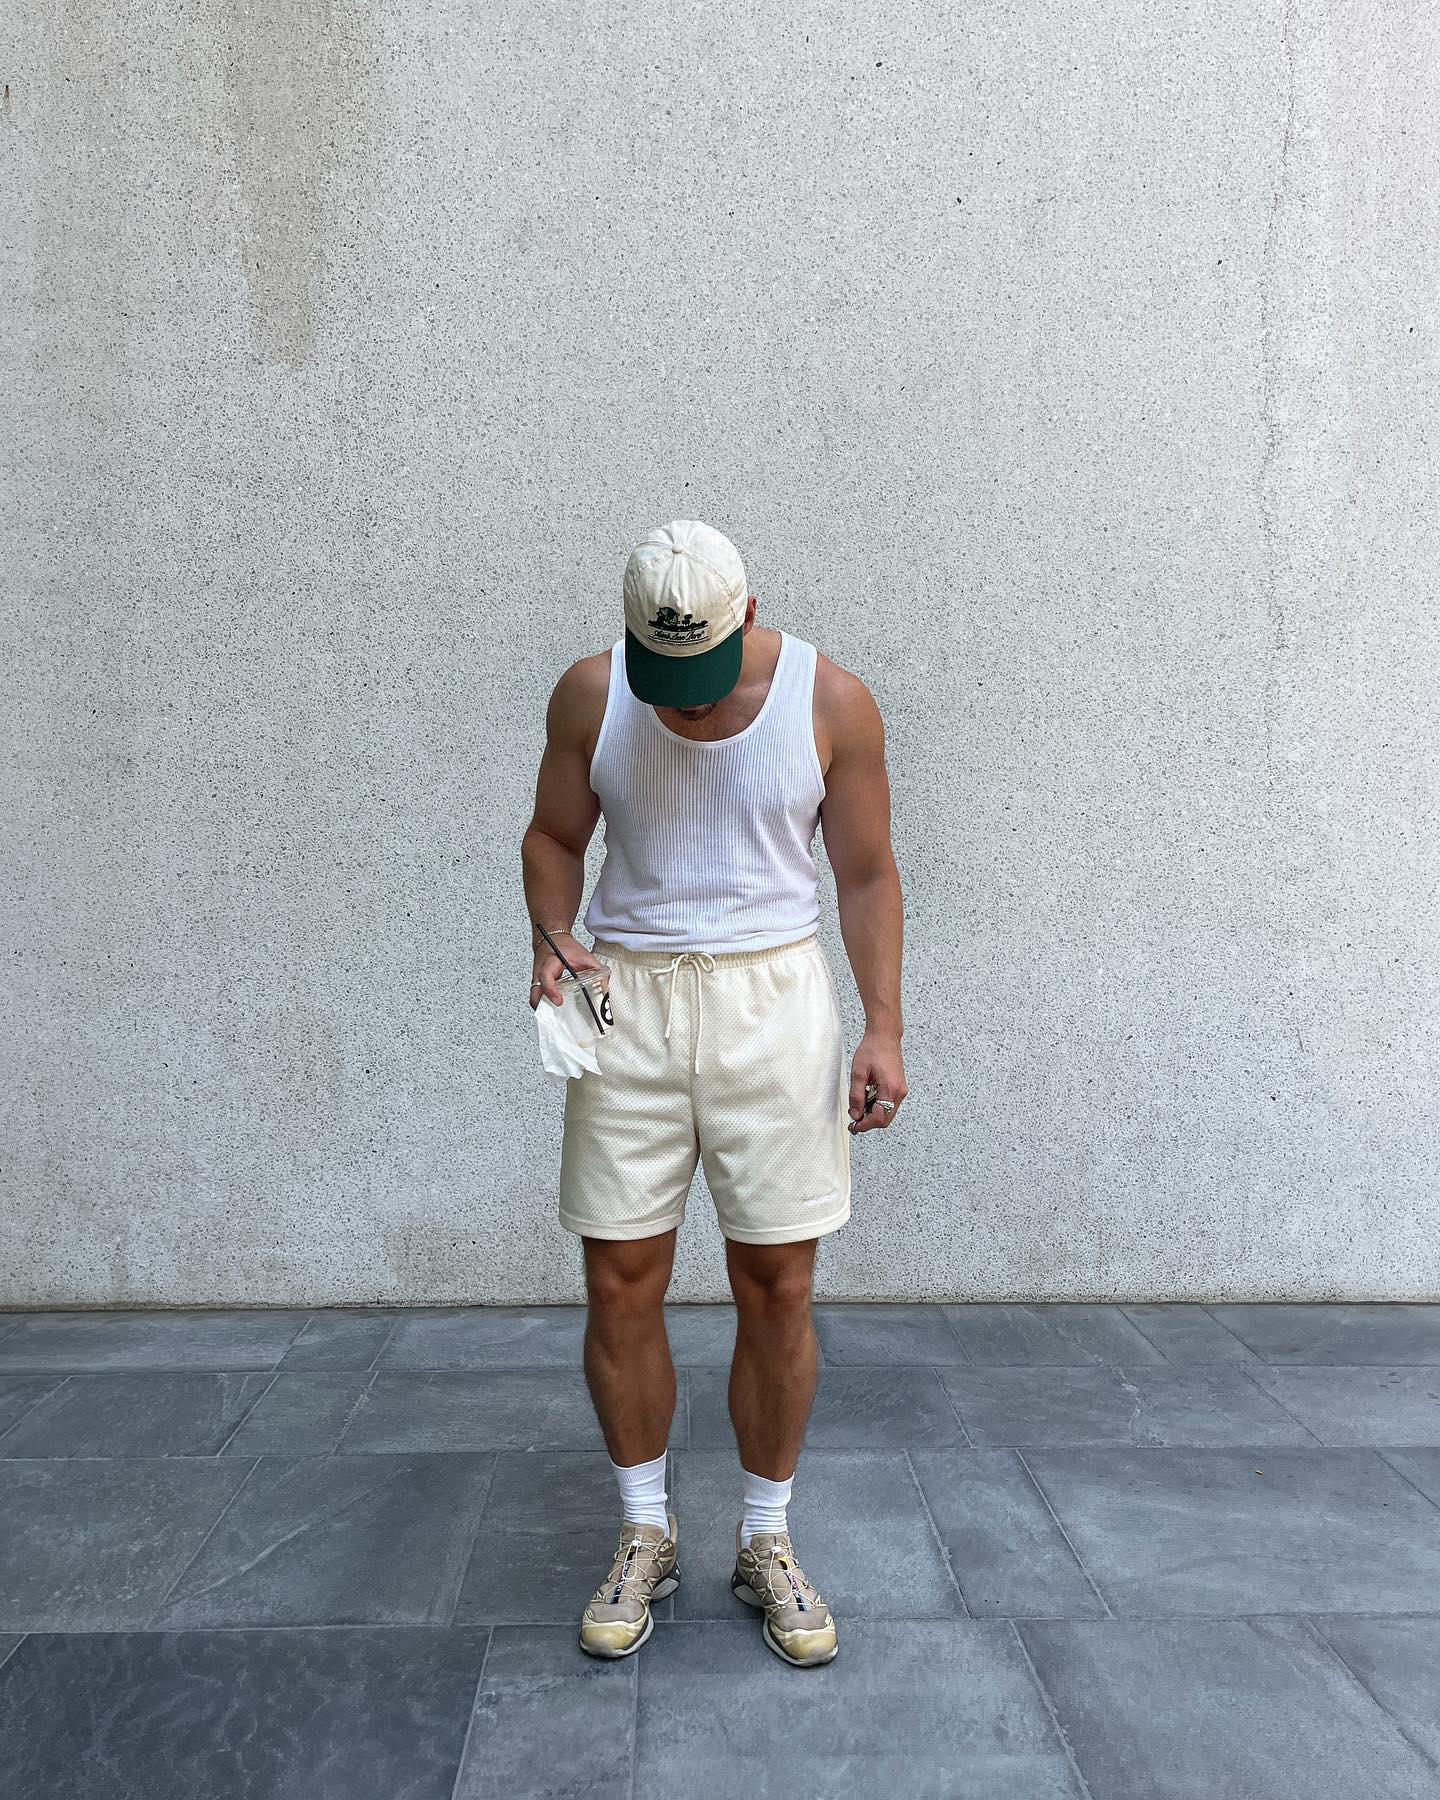 JH - Summer fits of late